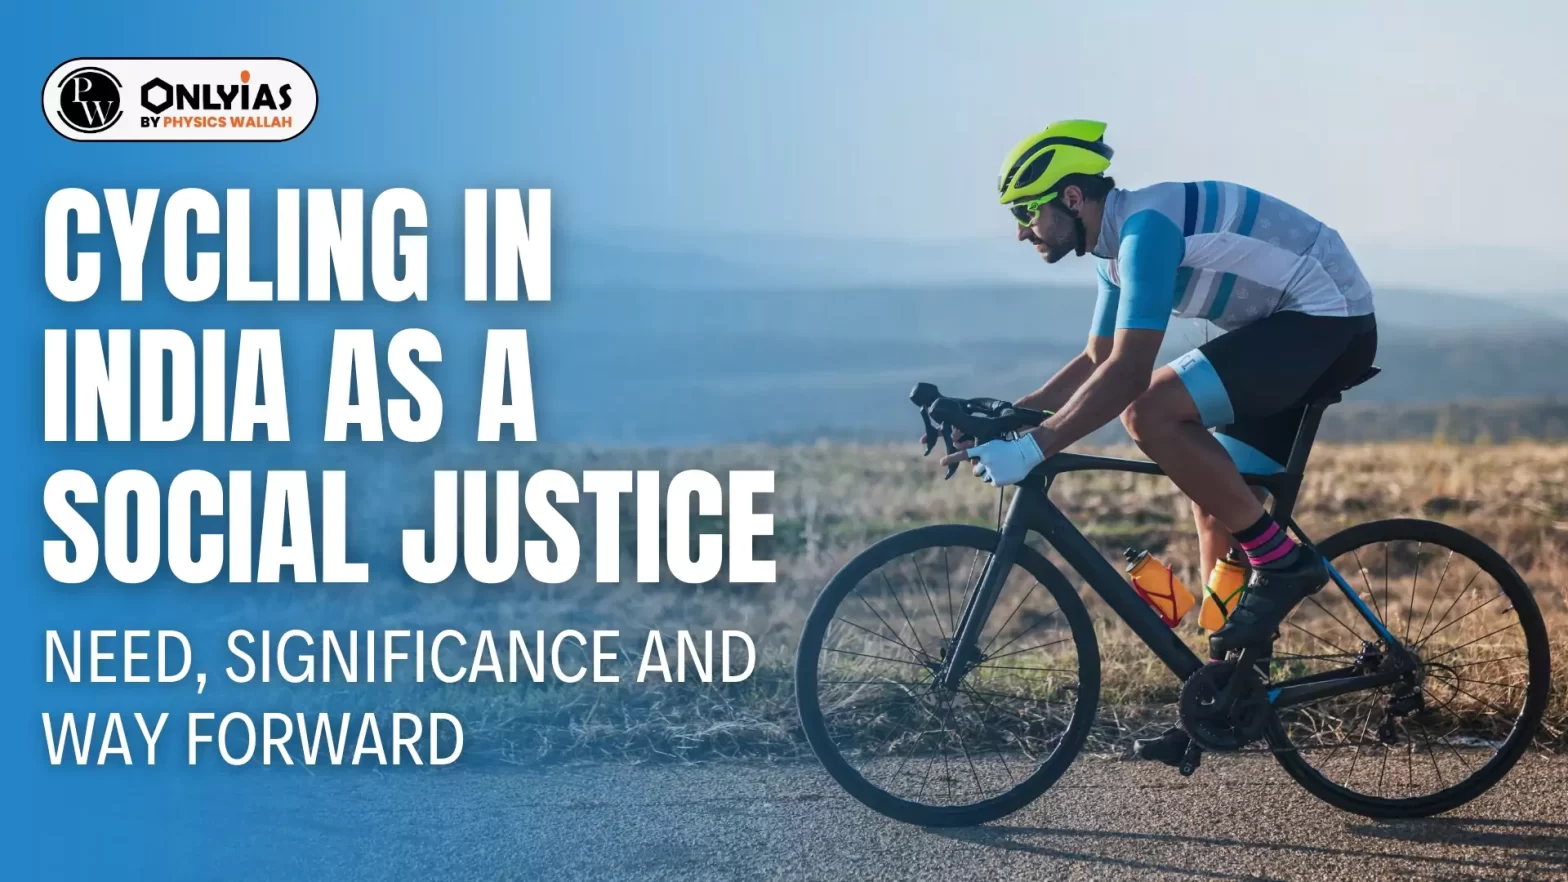 Cycling in India as a Social Justice- Need, Significance and Way Forward